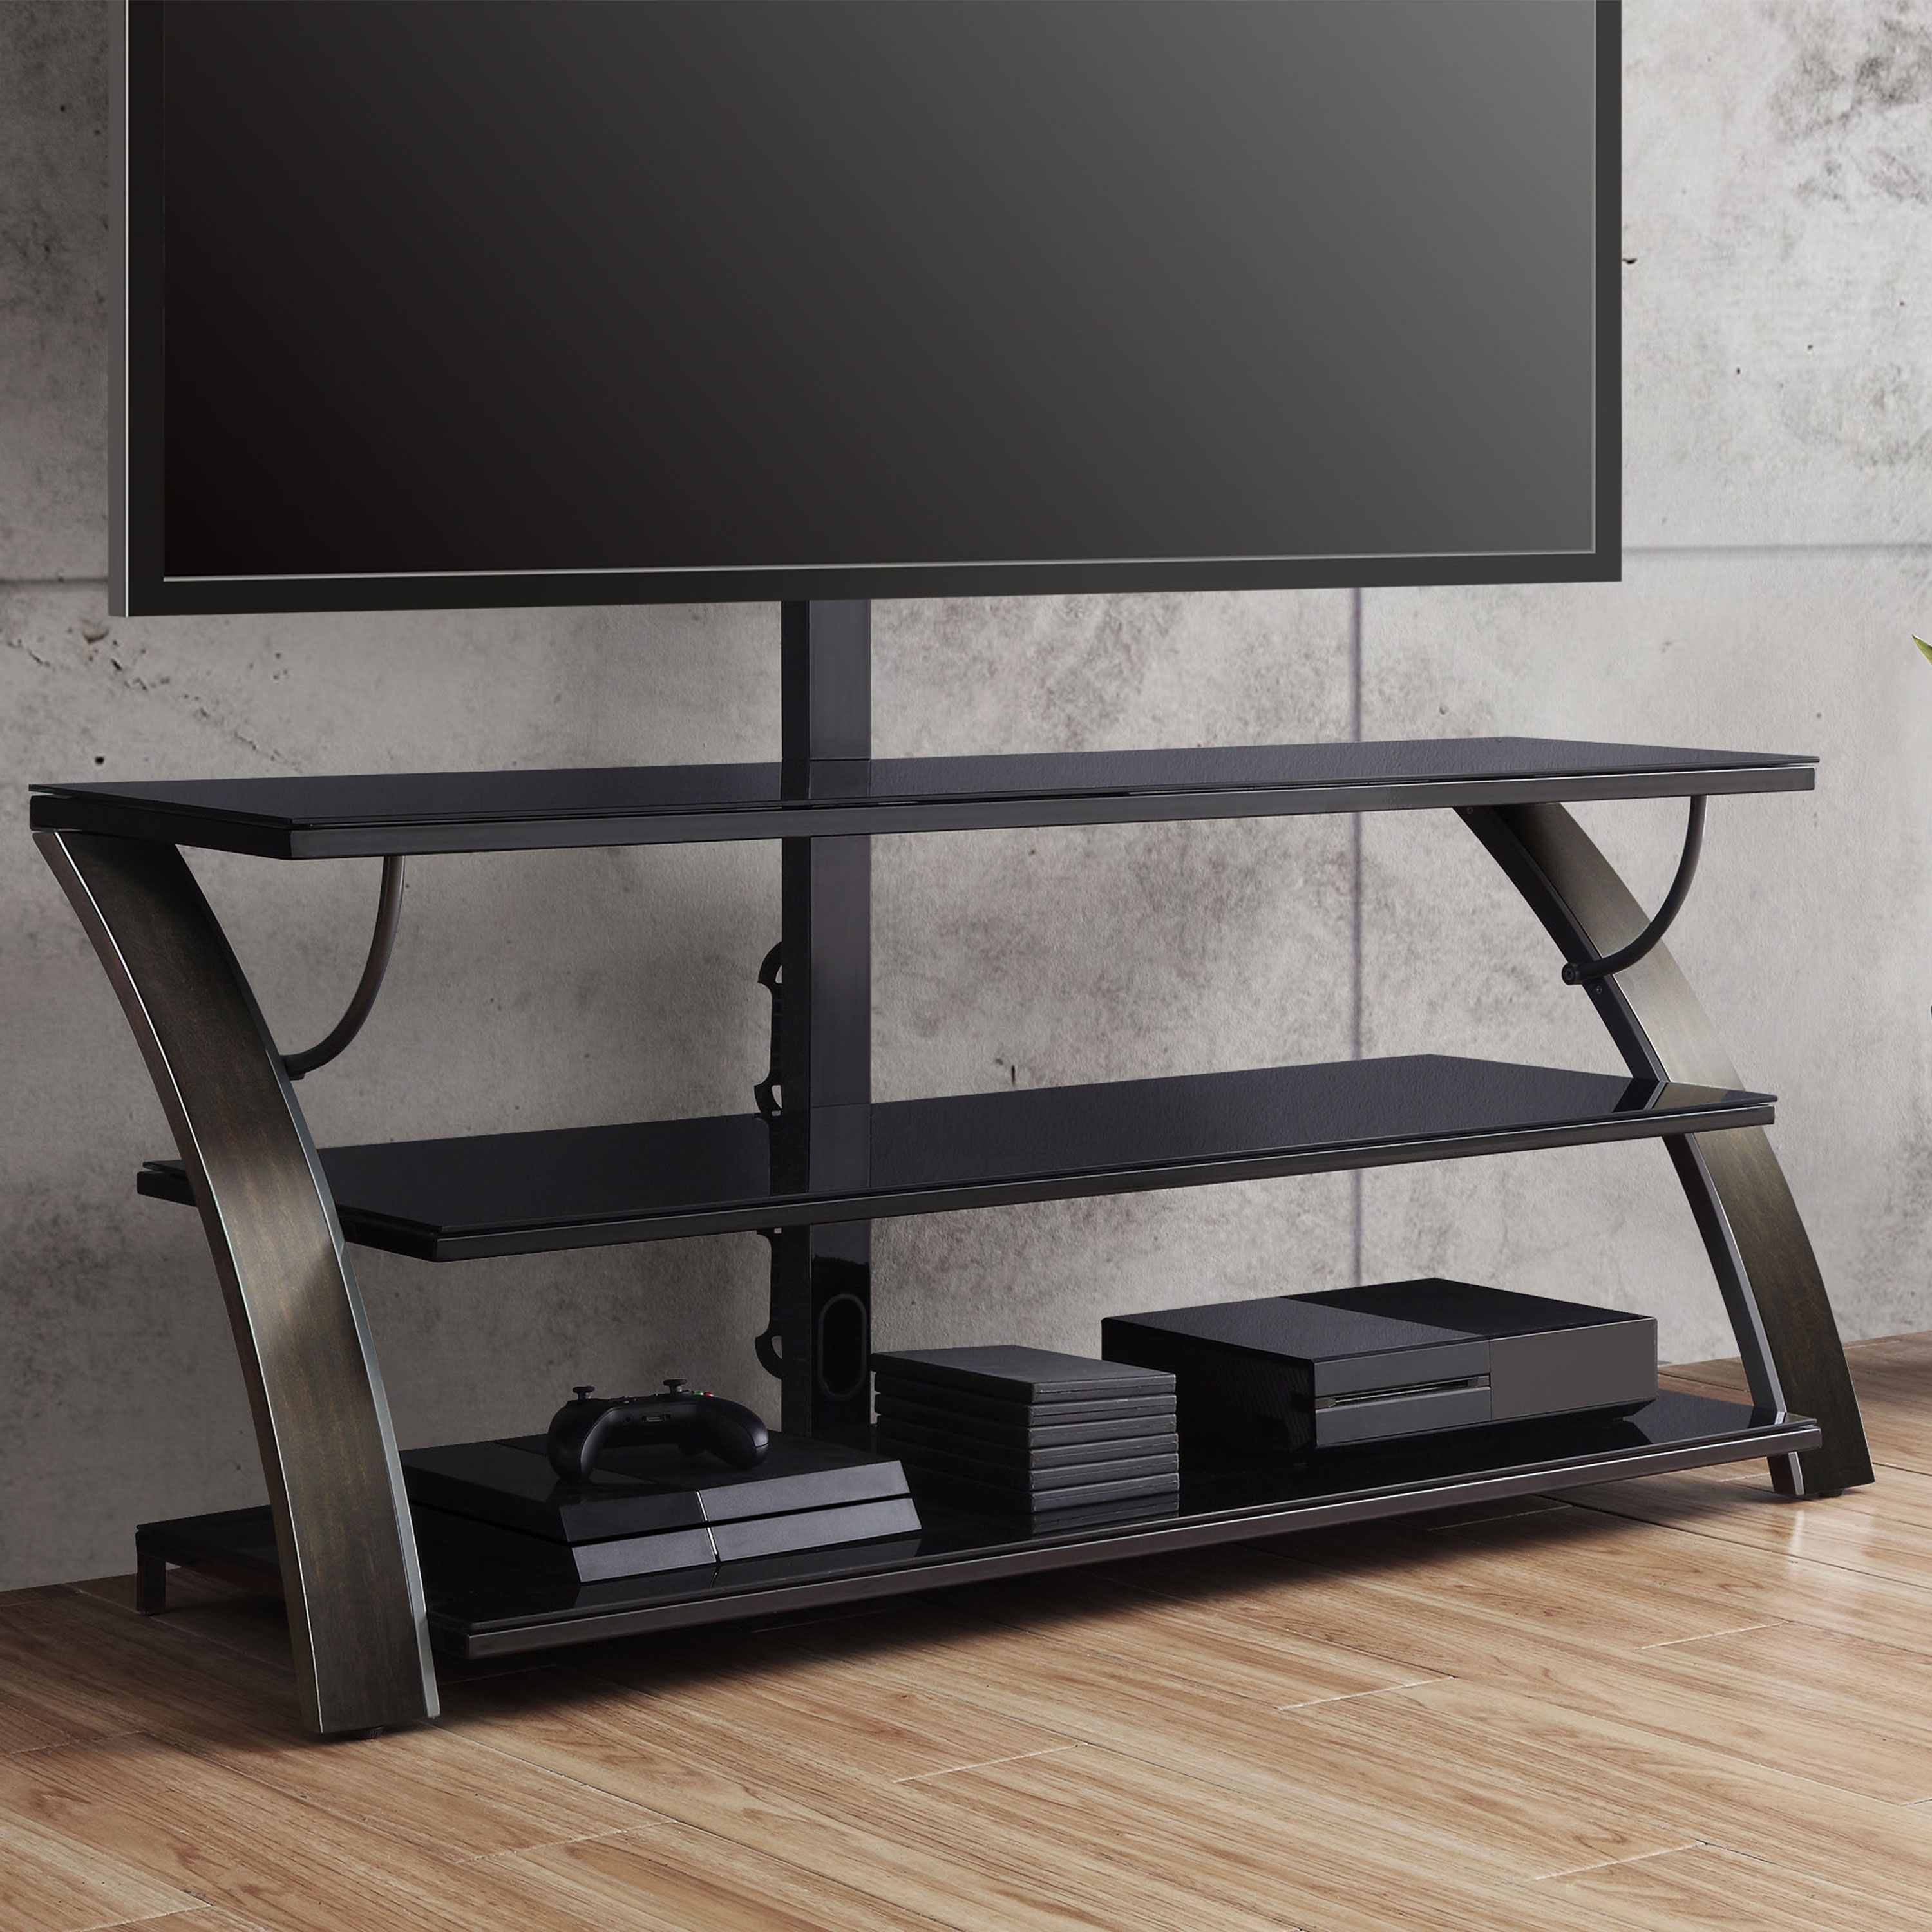 Whalen Payton 3-in-1 Flat Panel TV Stand for TVs up to 65", Charcoal - image 4 of 11